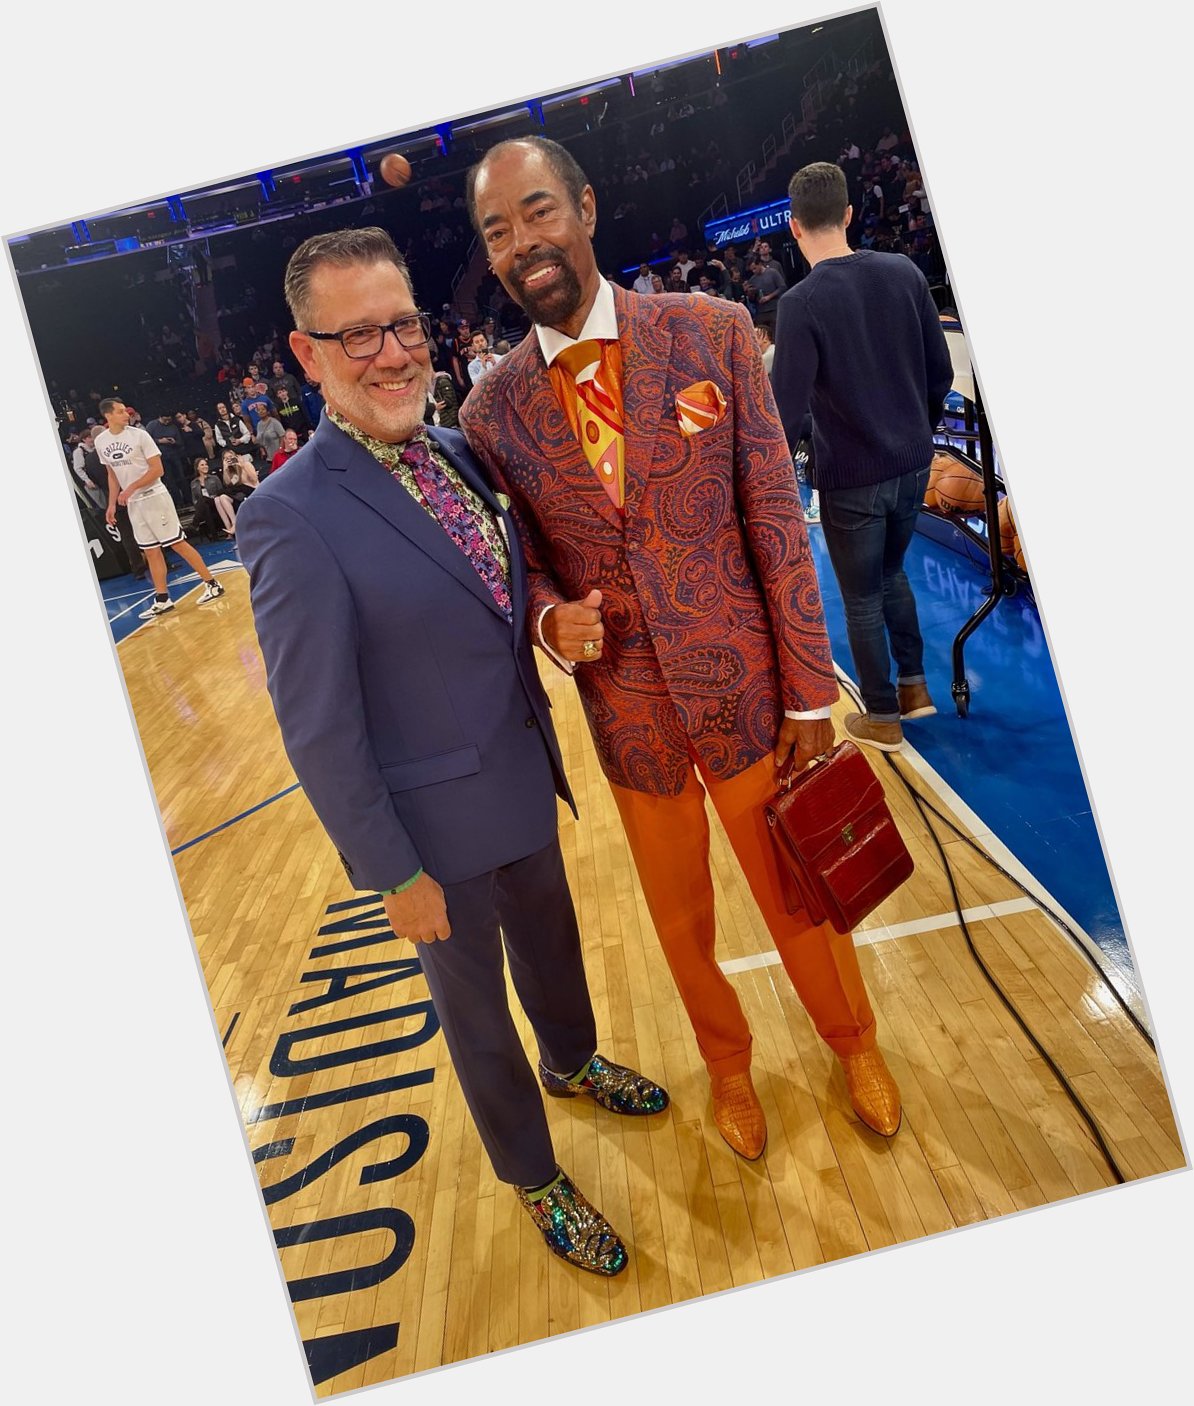 Happy 78th Birthday to 7x AllStar, 2x NBA champion and the coolest dude in the Association Walt Frazier! 